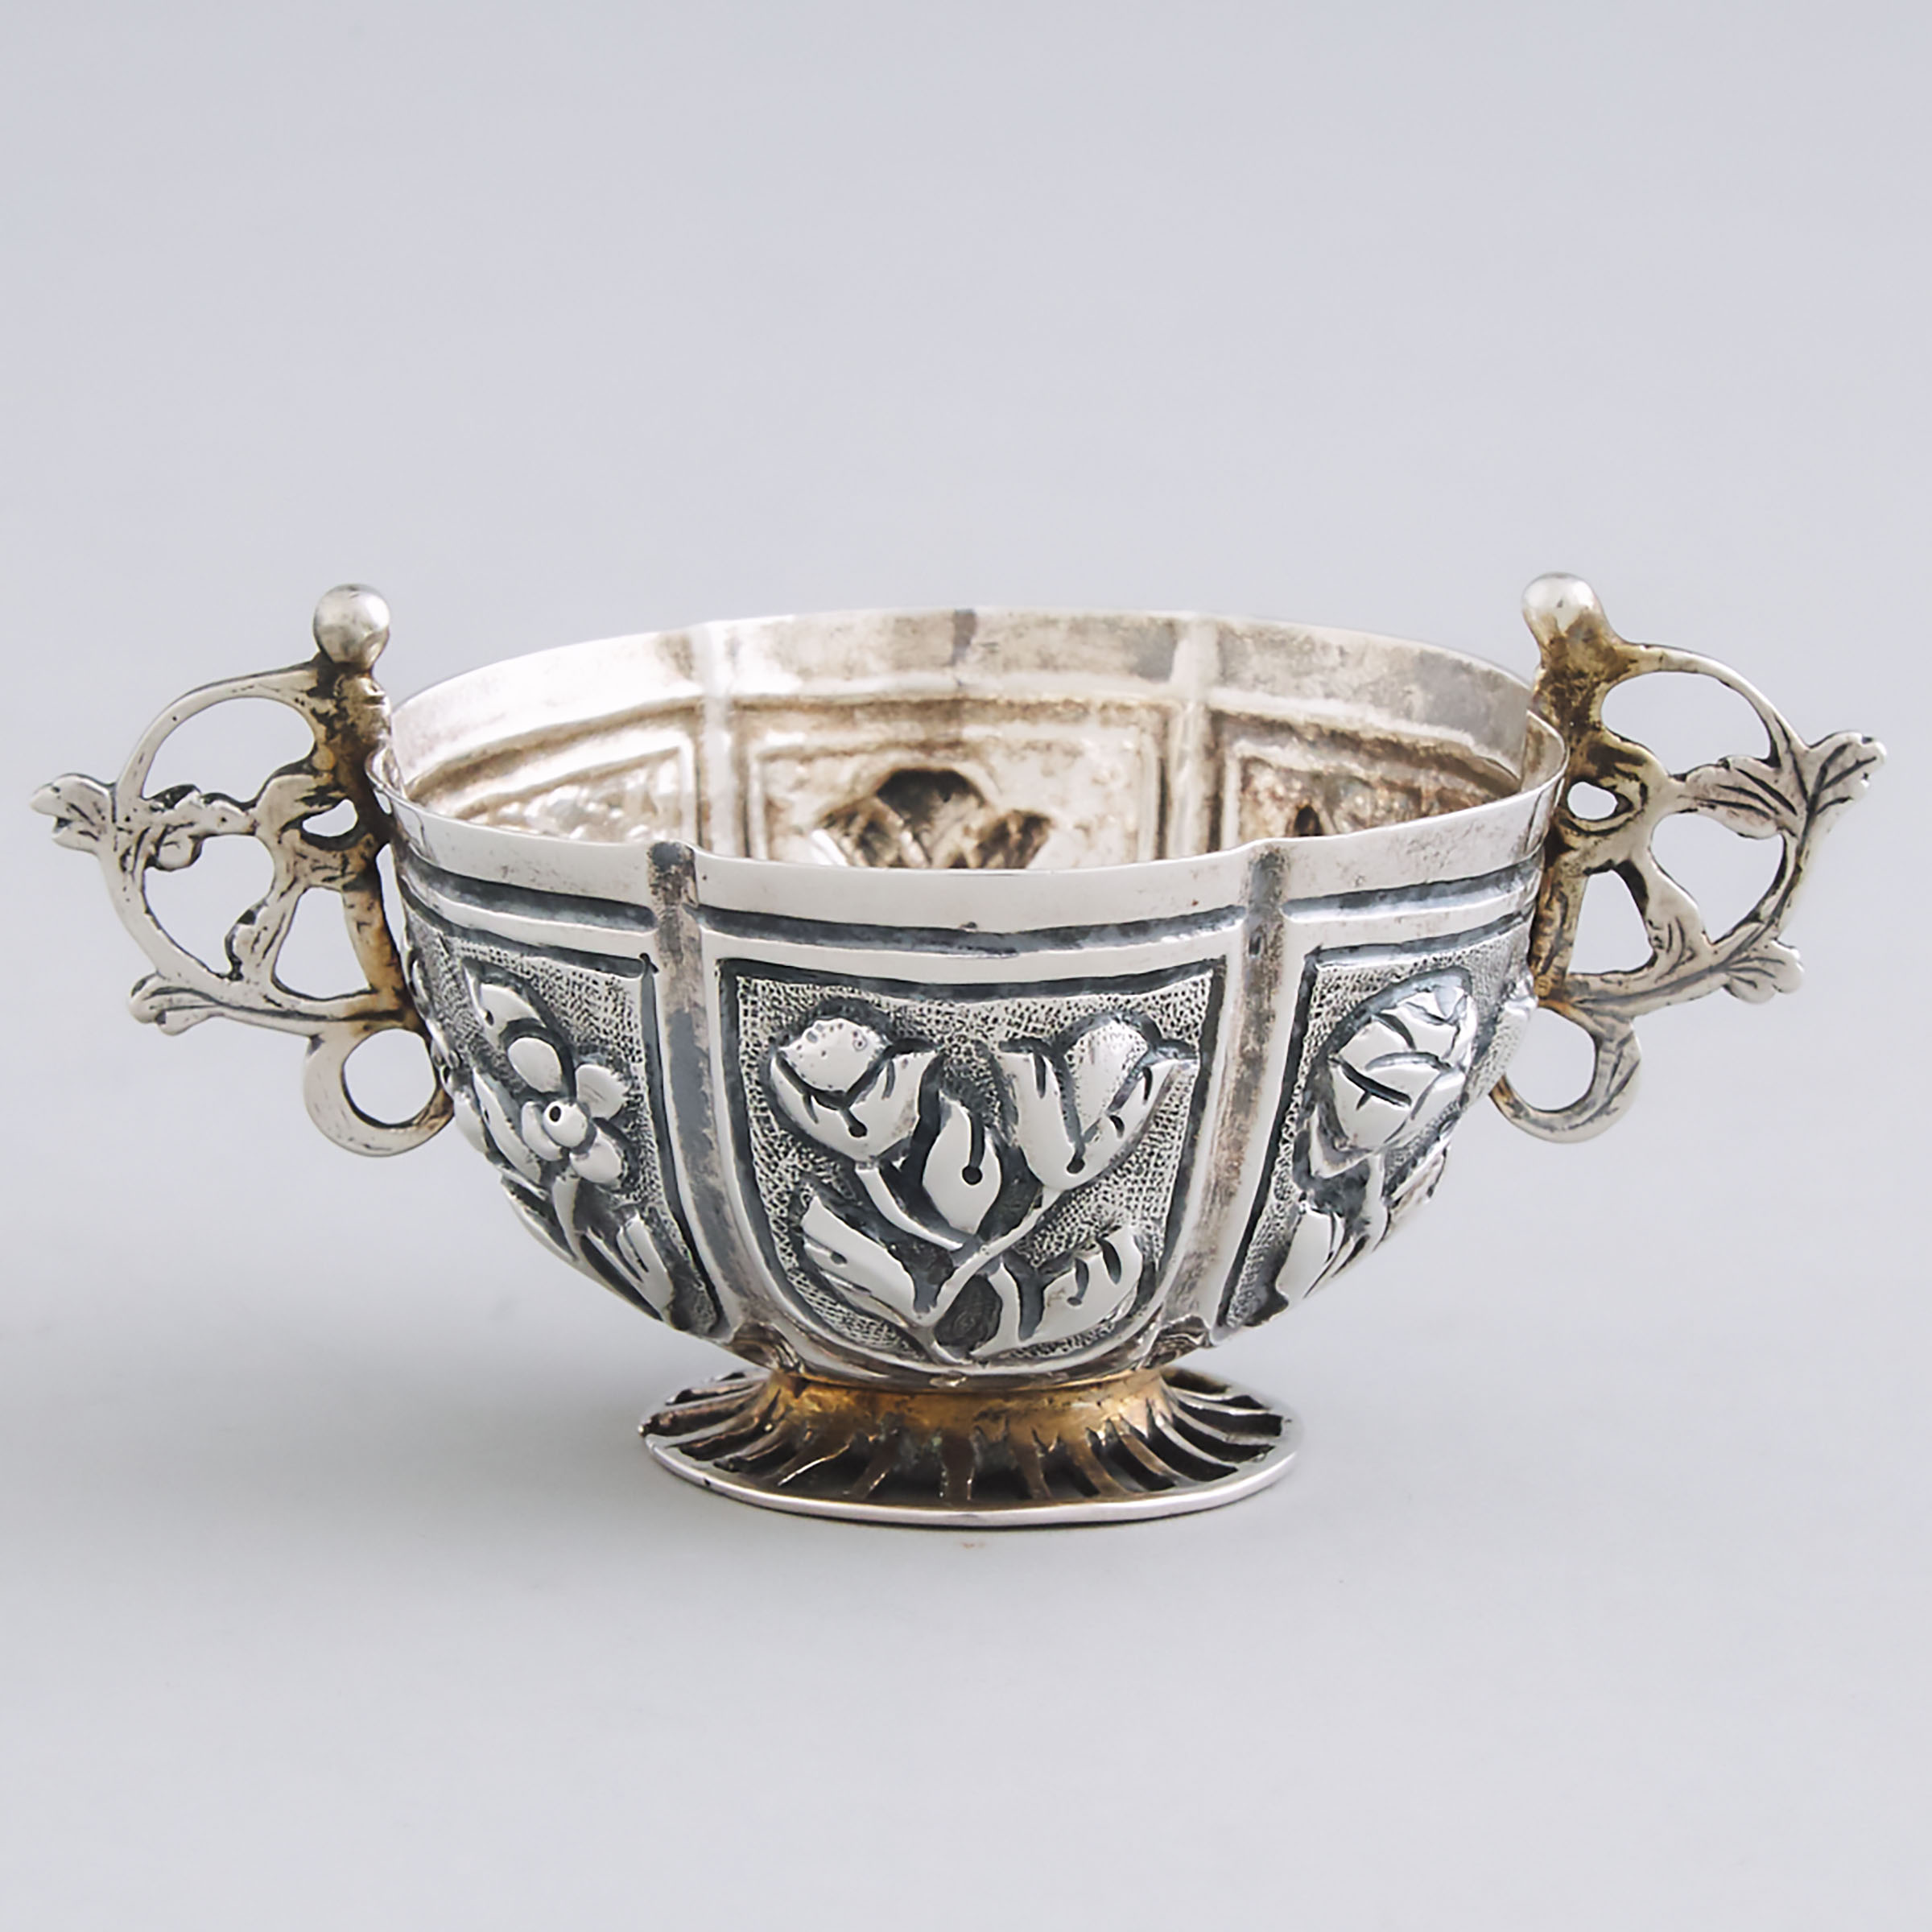 Silver Lobed and Repoussé Two-Handled Cup, possibly Spanish Colonial, 18th/19th century